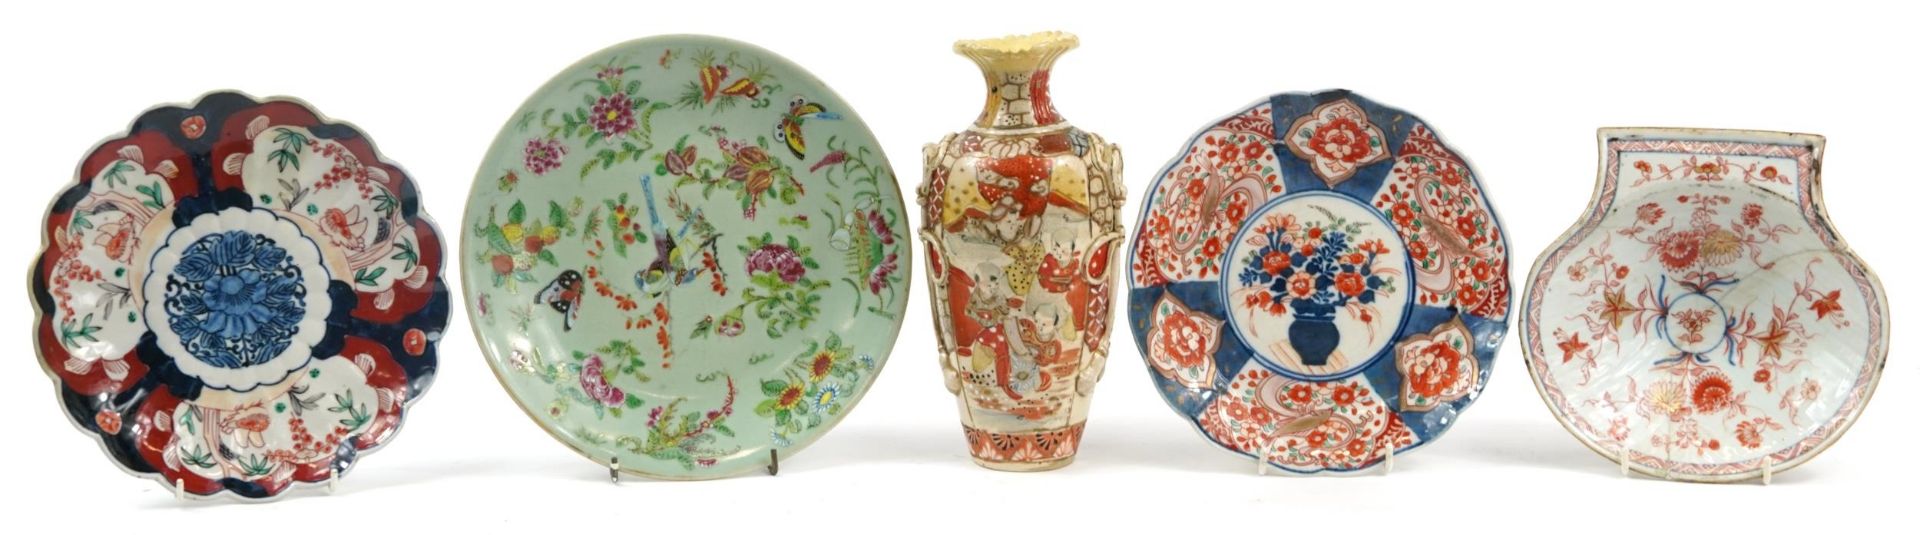 Chinese and Japanese ceramics including an Cantonese plate hand painted in the famille rose